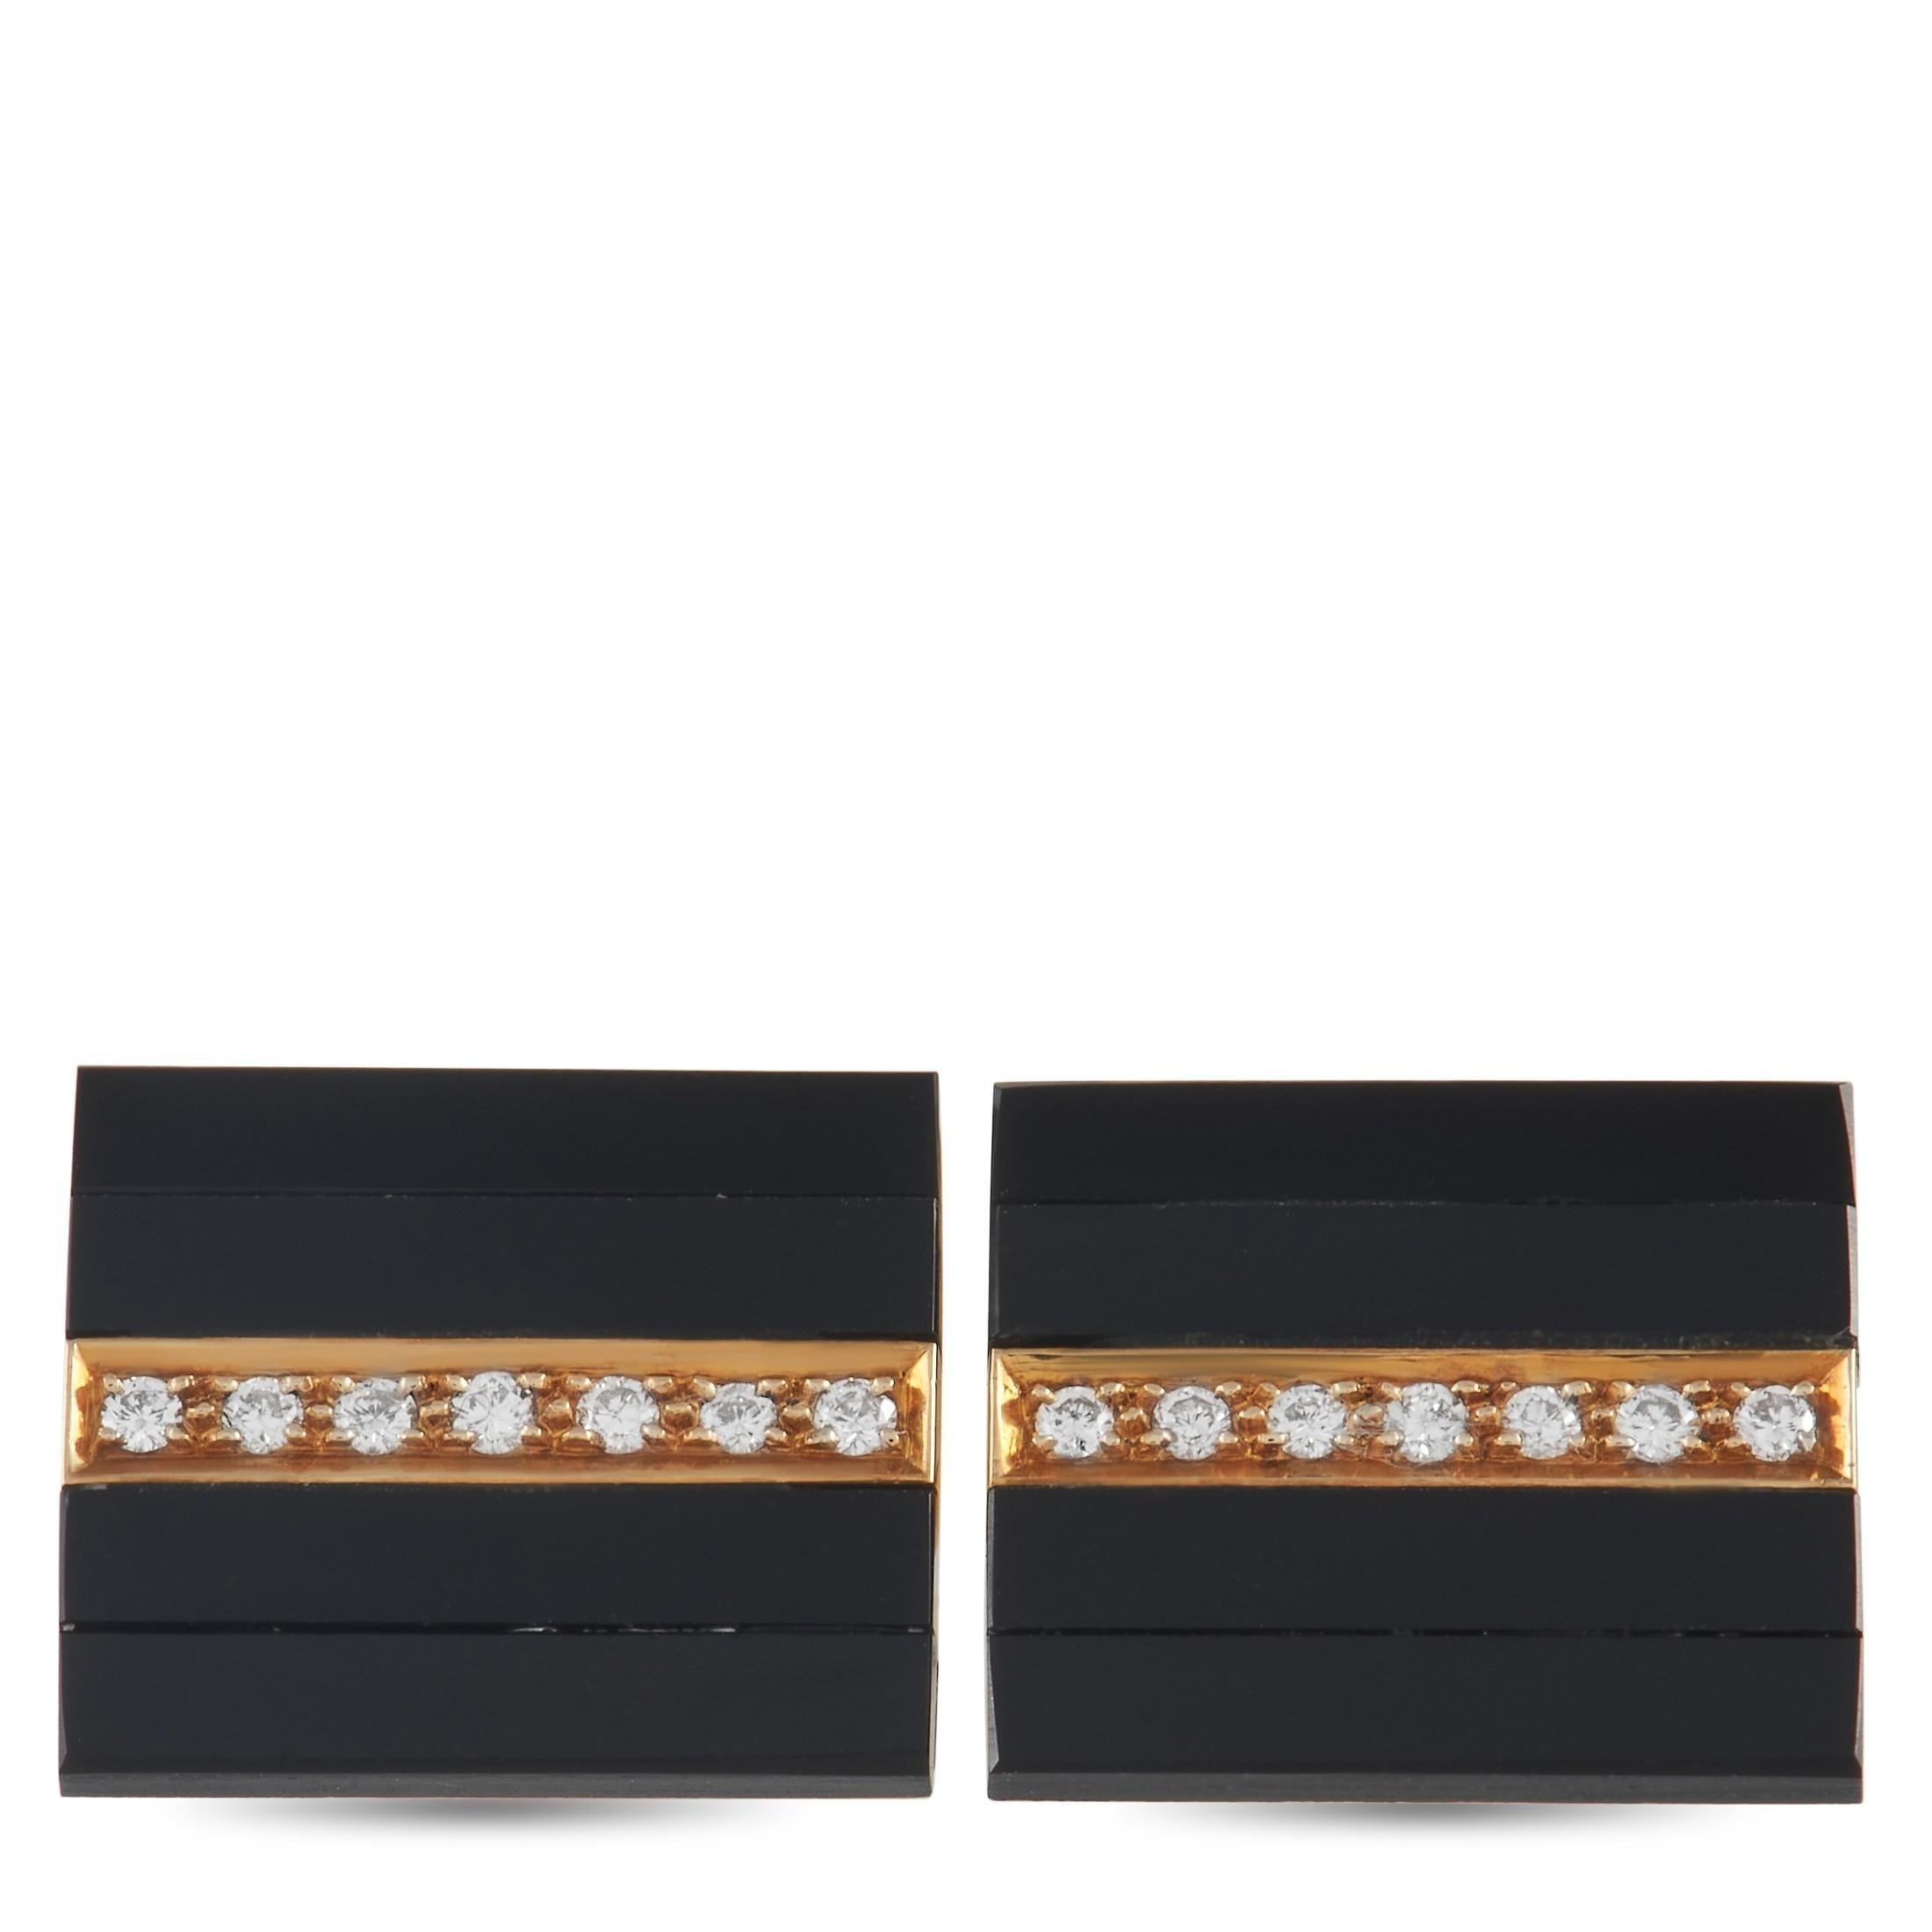 Each one of these stylish square cufflinks features a striking pairing of sleek black onyx bands and opulent 18K Yellow Gold. At the center you’ll also find a series of sparkling diamonds that together possess a total weight of 0.15 carats. An ideal